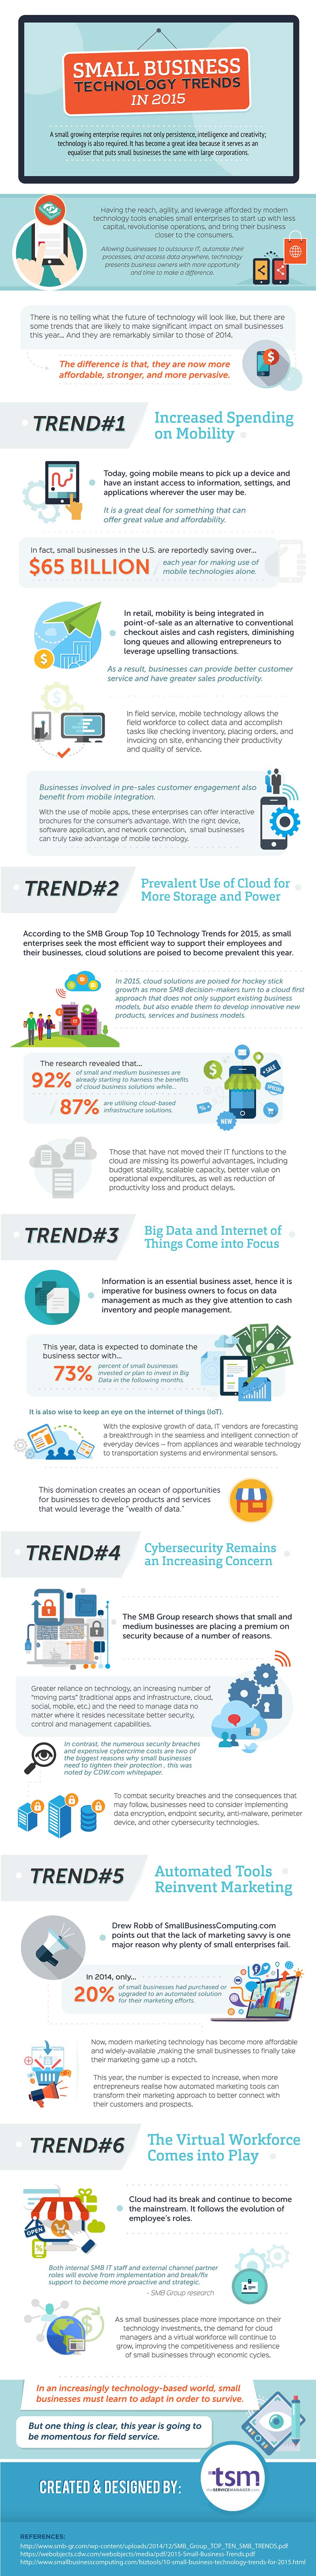 Small Business Technology Trends in 2015 HD